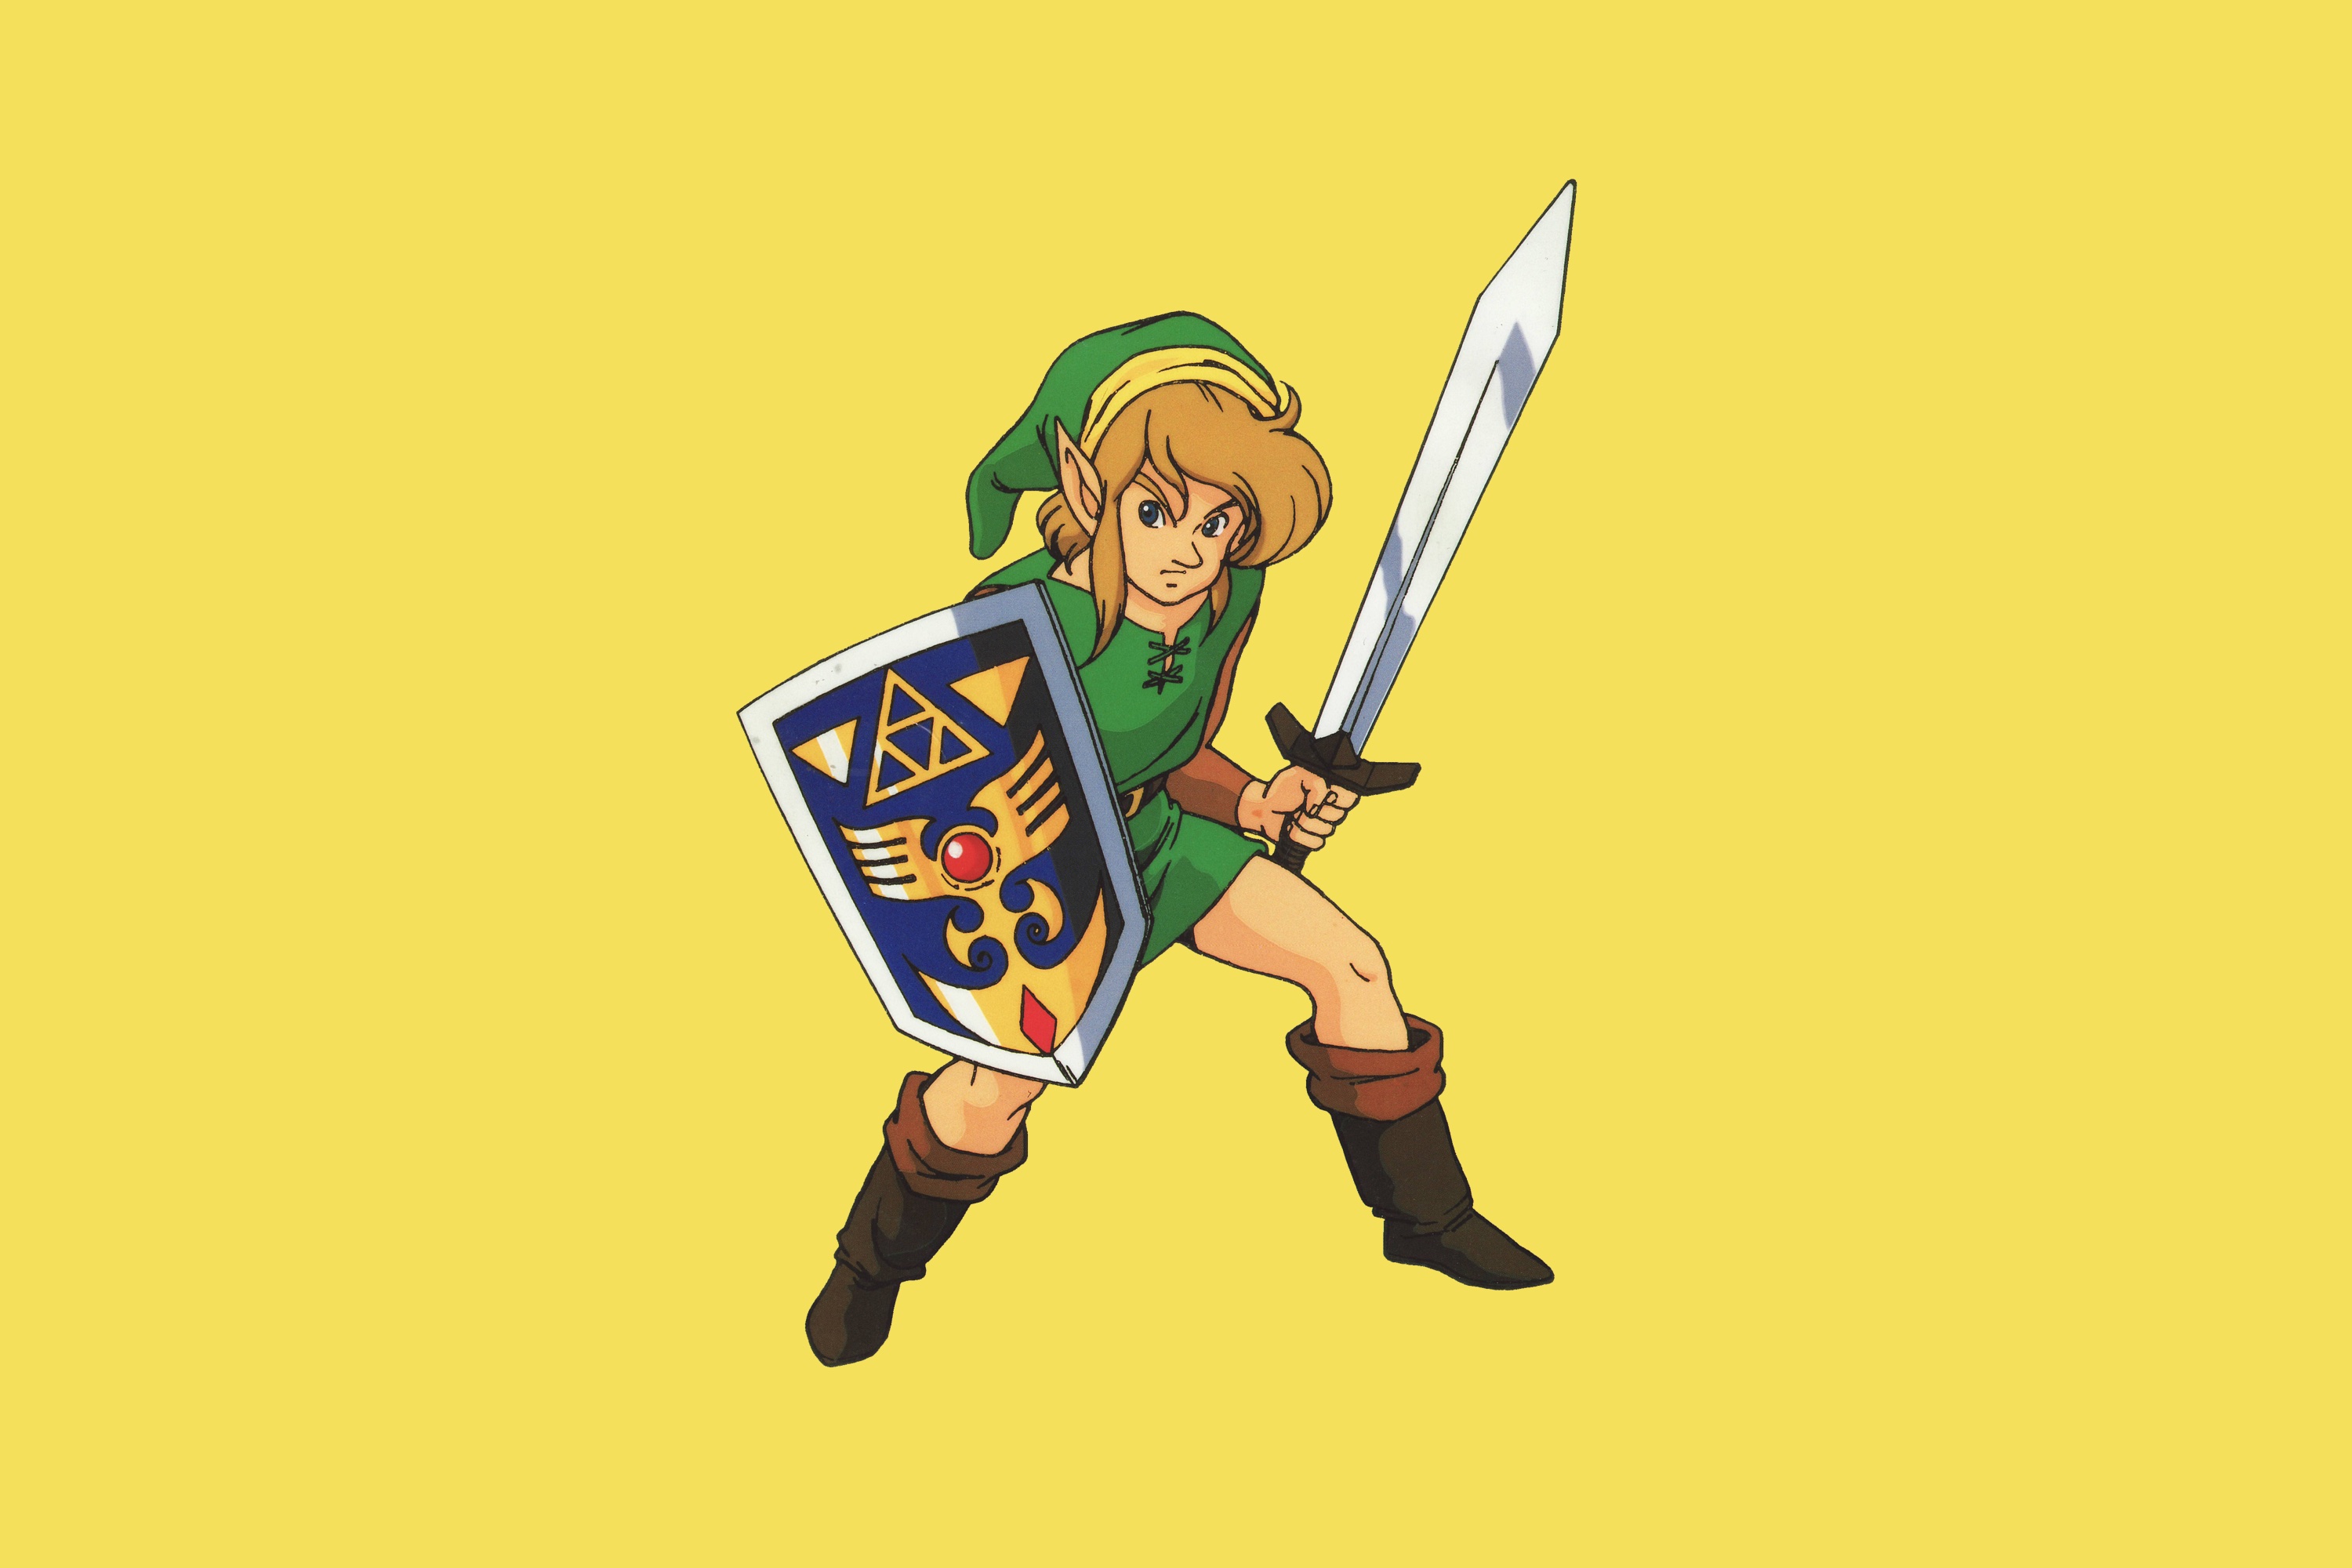 Artwork of Link from The Legend of Zelda shows him posing while holding a sword and shield